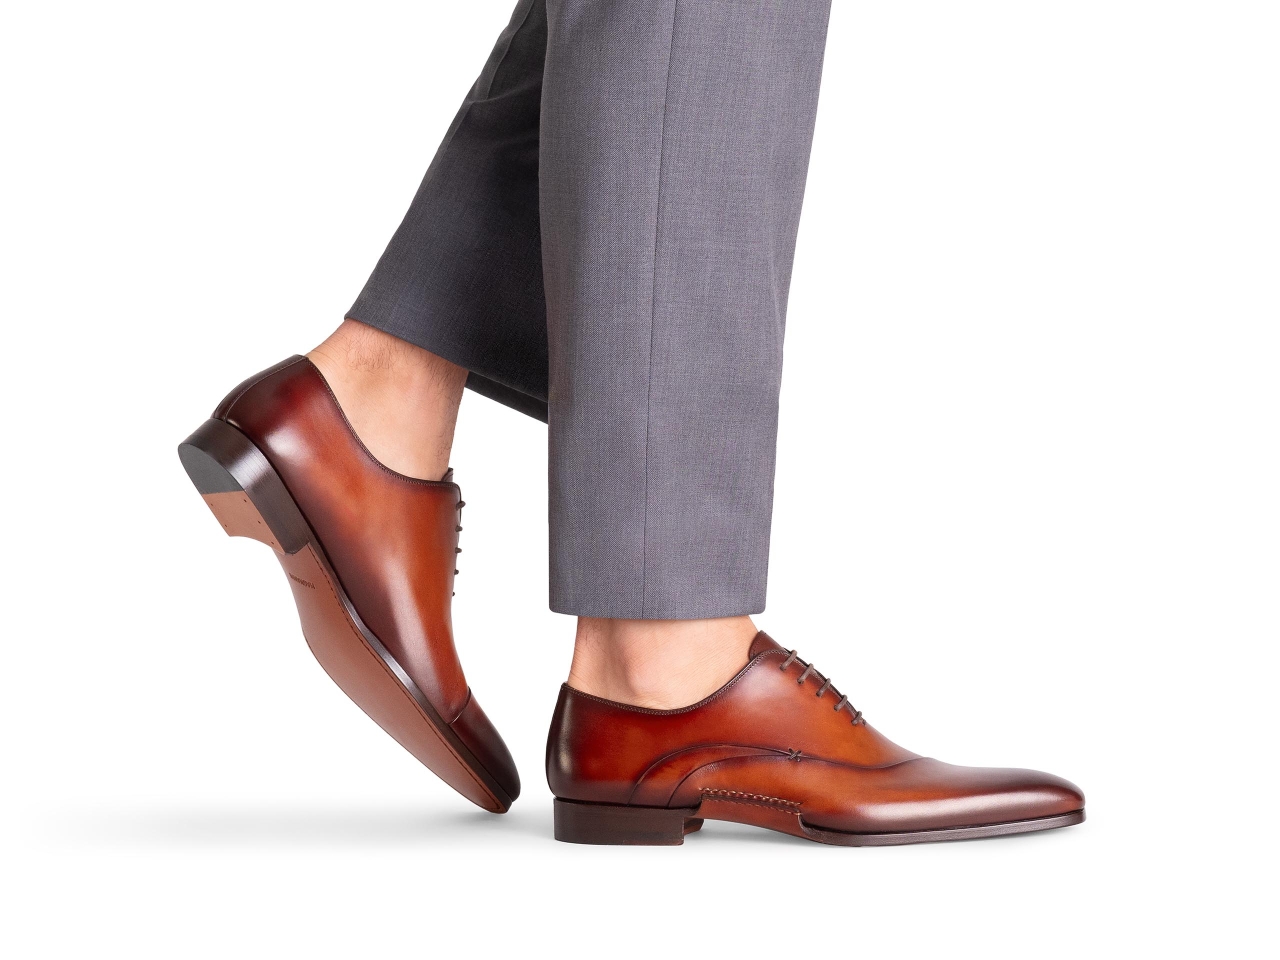 The Keith Cognac pairs well with light grey pants